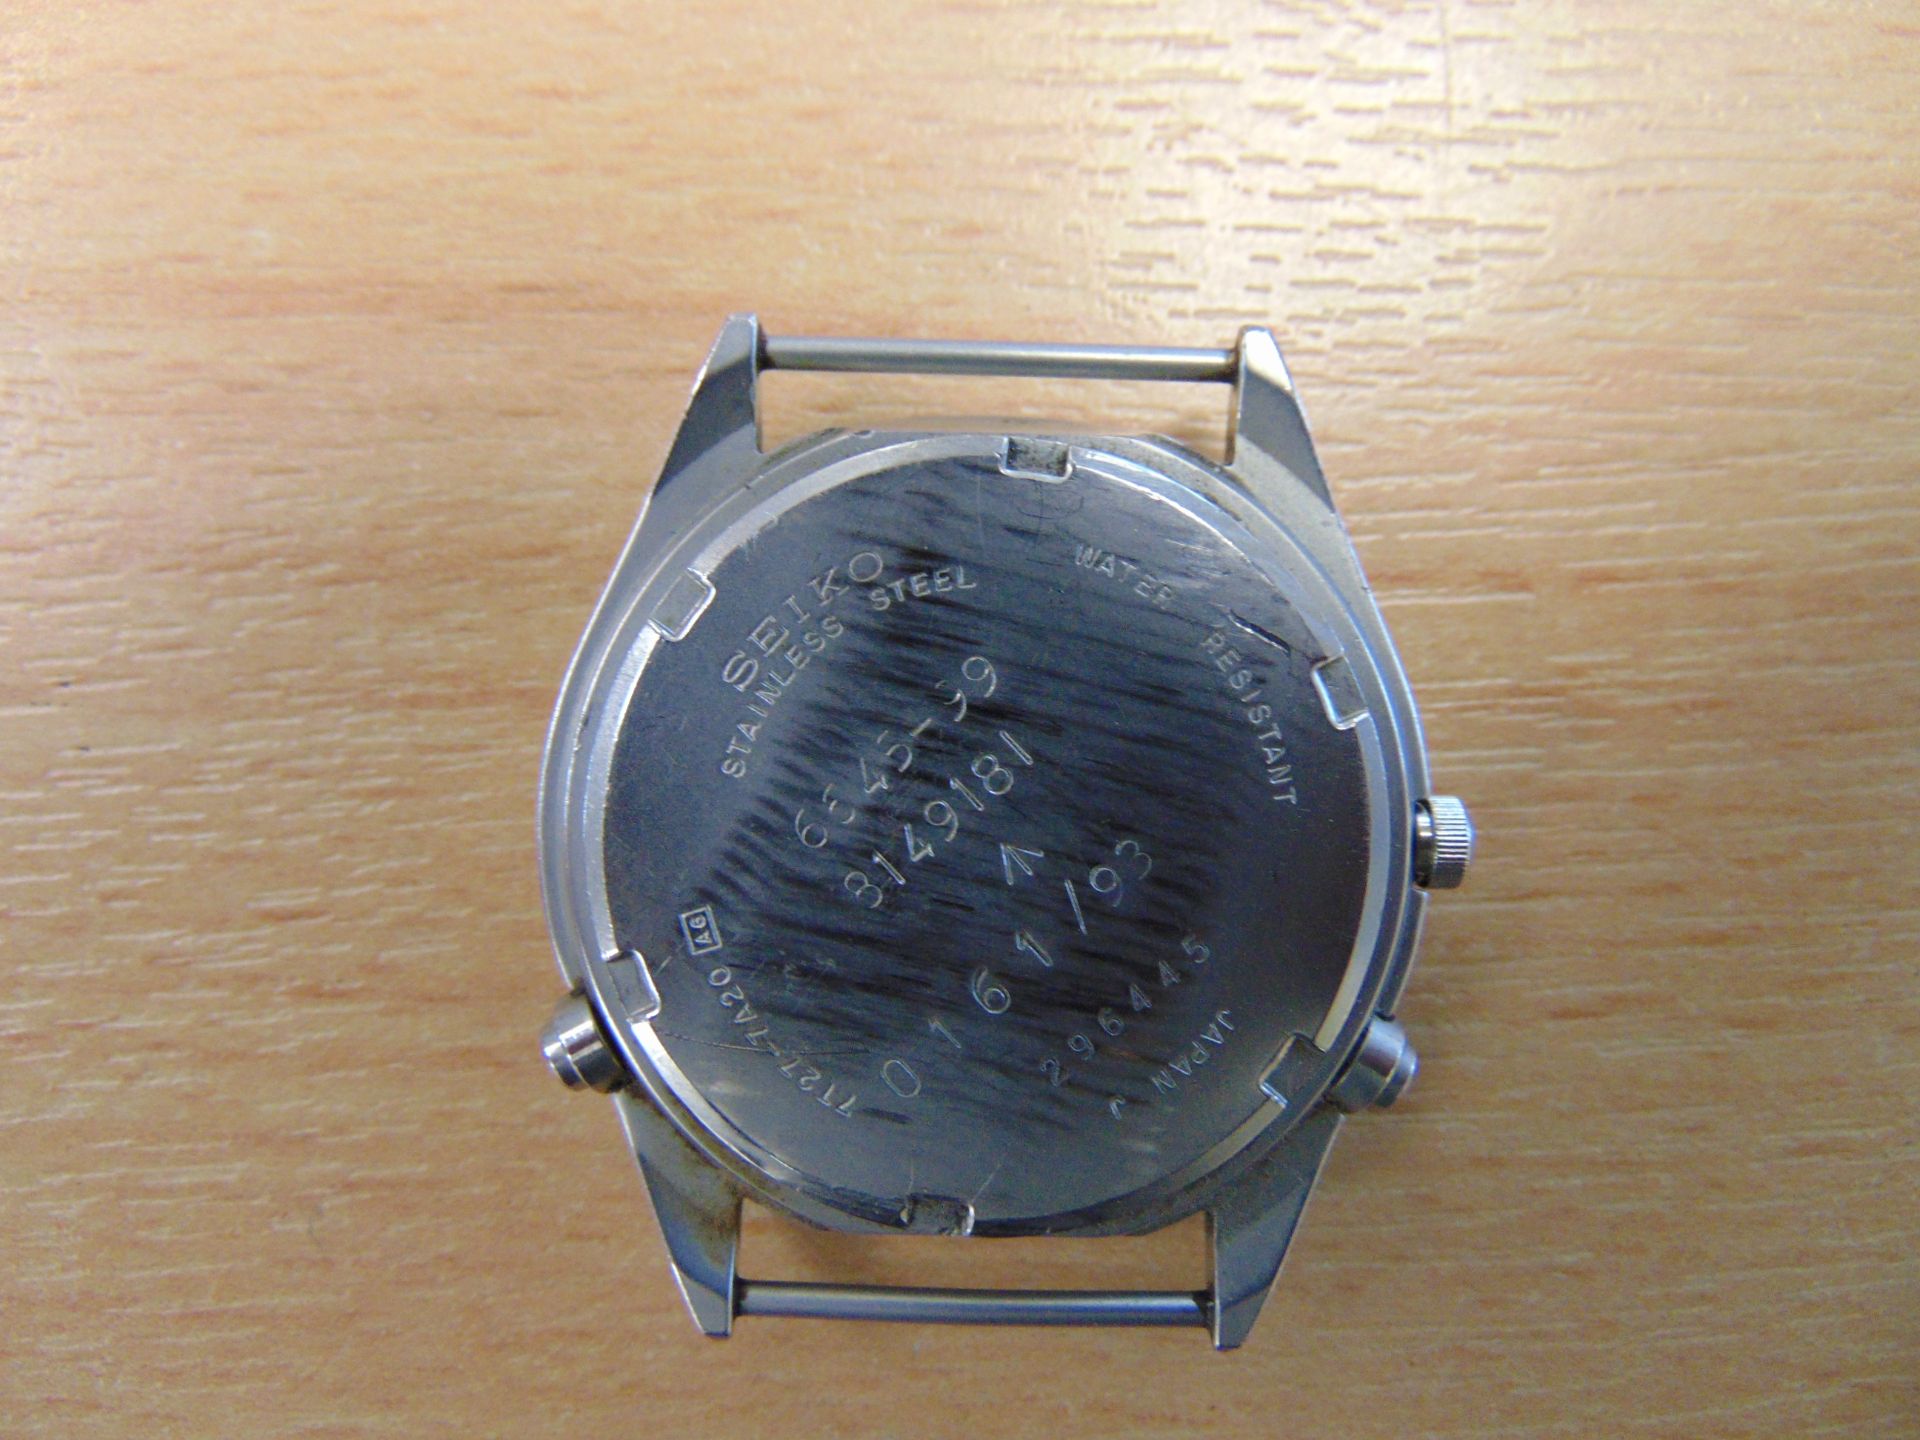 Seiko Gen 2 Pilots Chrono RAF Tornado Force Issue with Date Adjust Nato Marks, LOW SNo 161 - Image 4 of 4